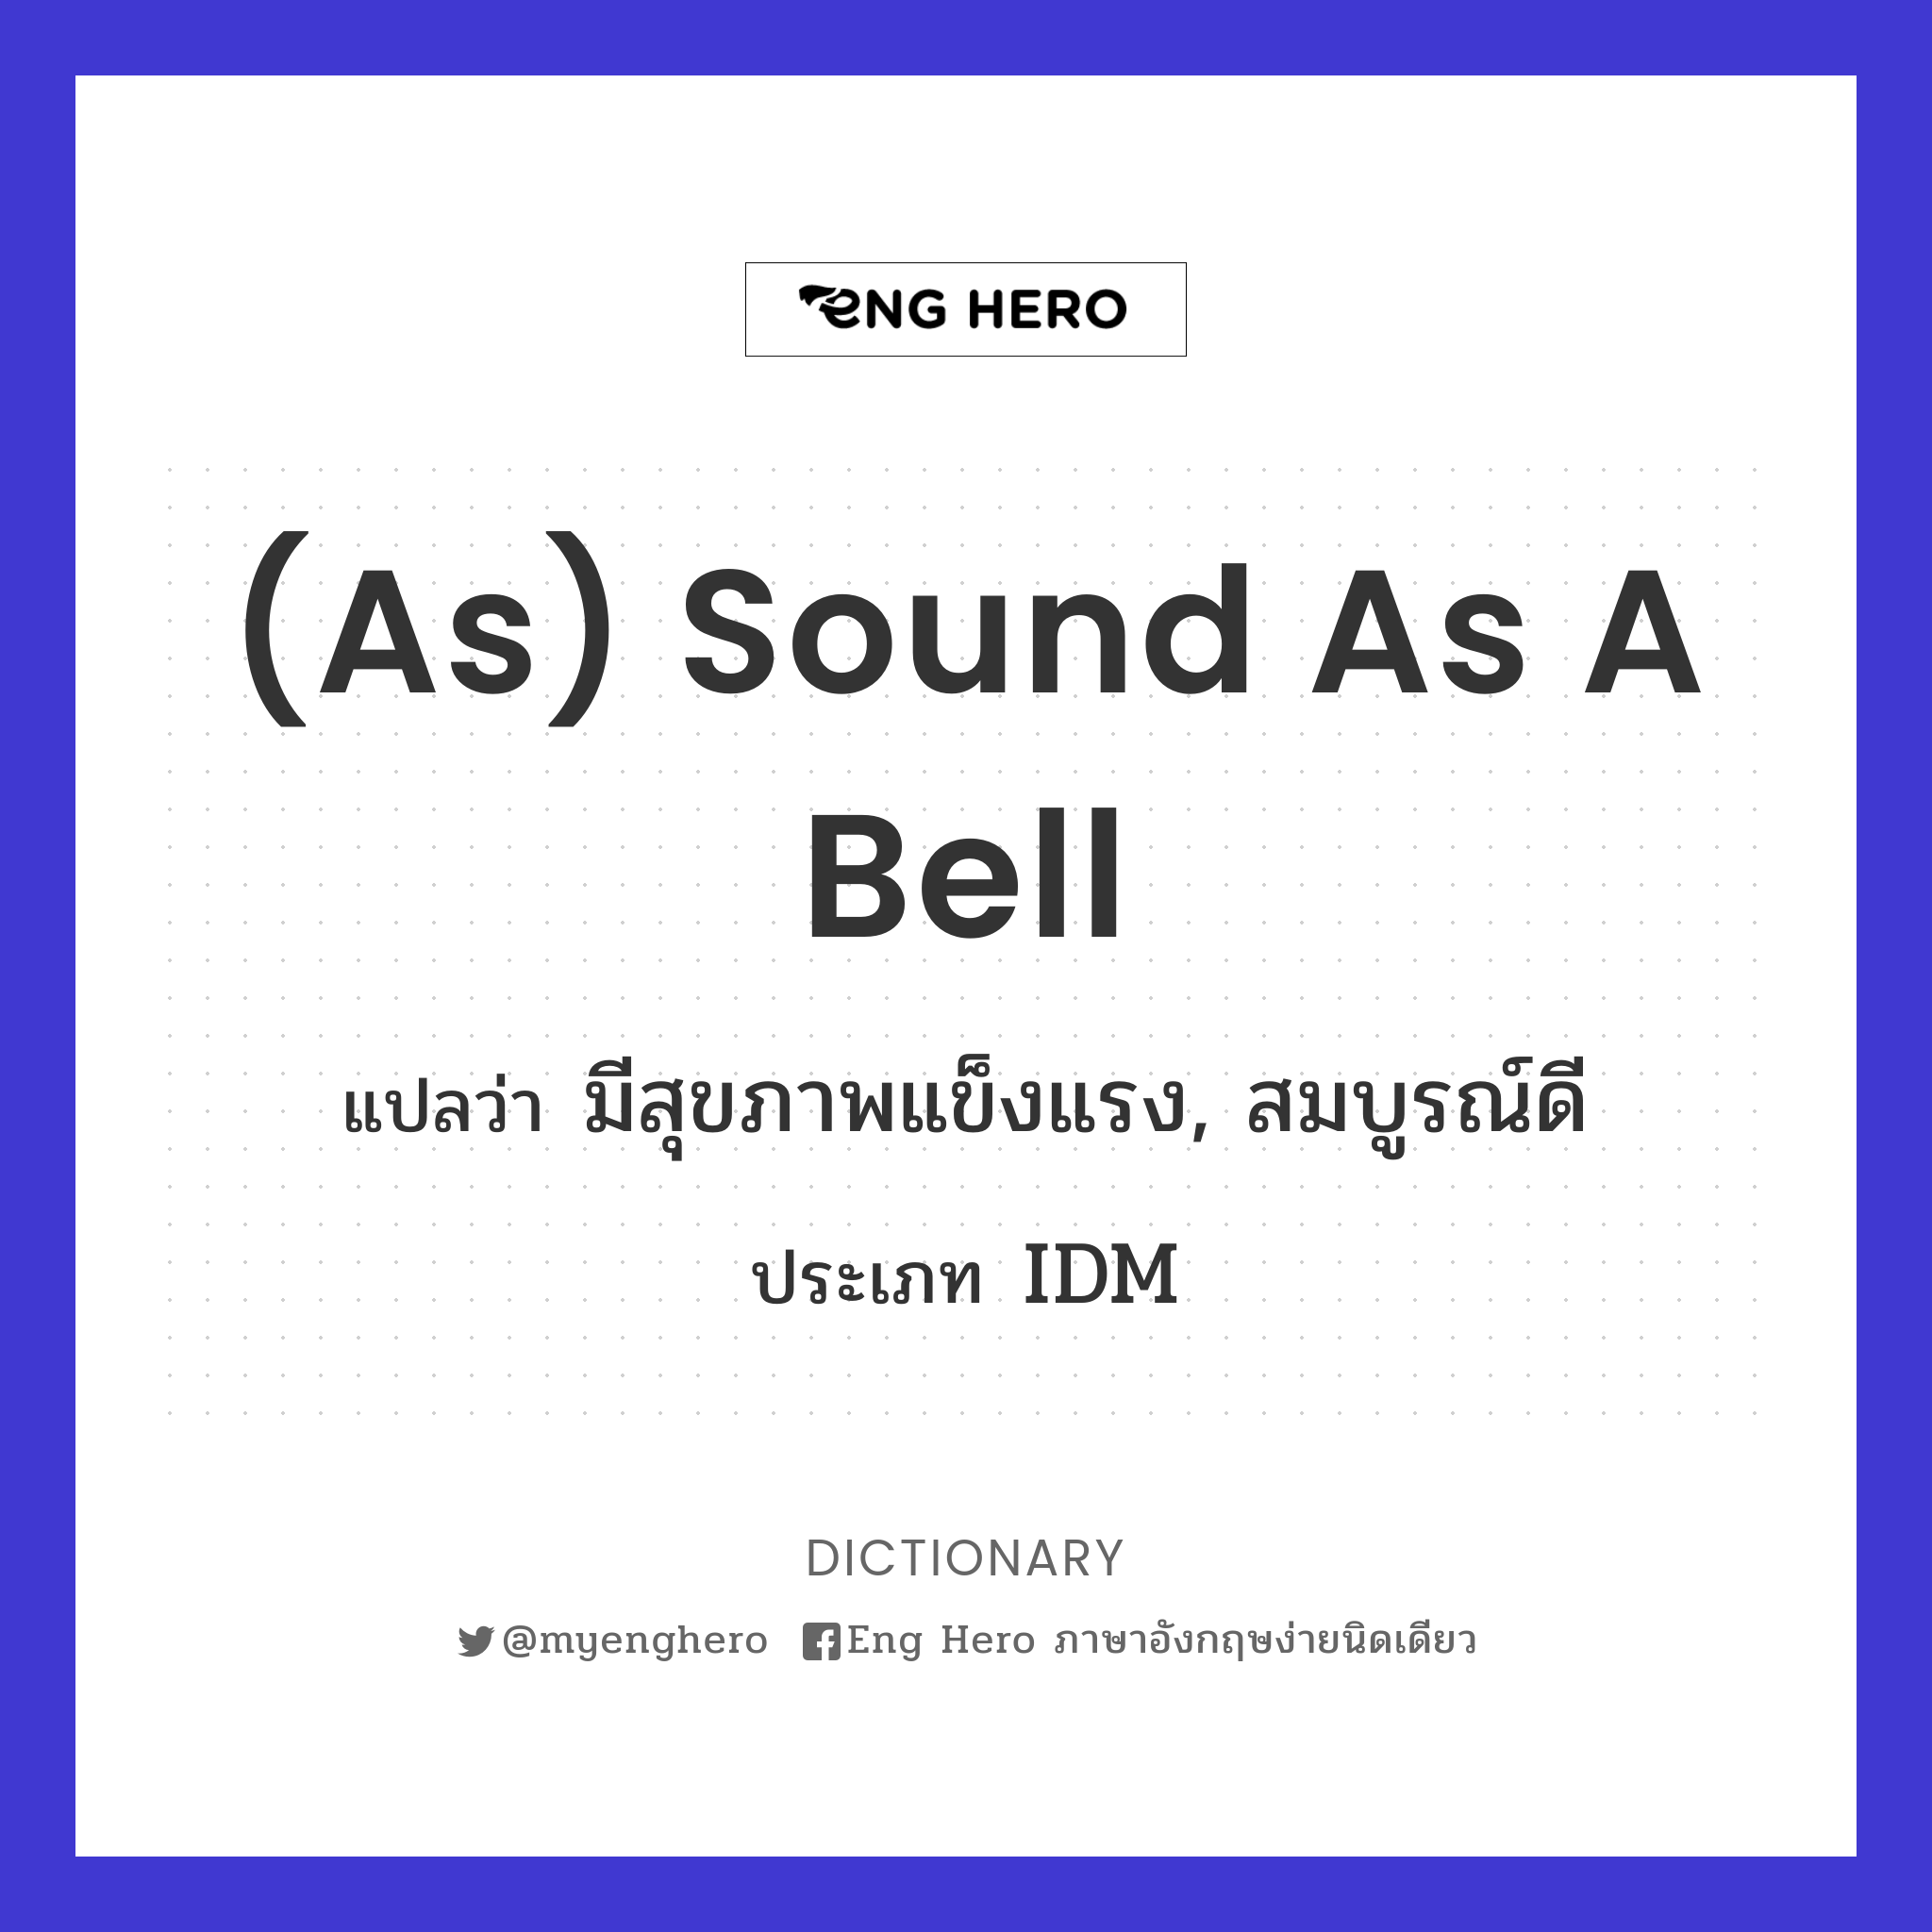 (as) sound as a bell